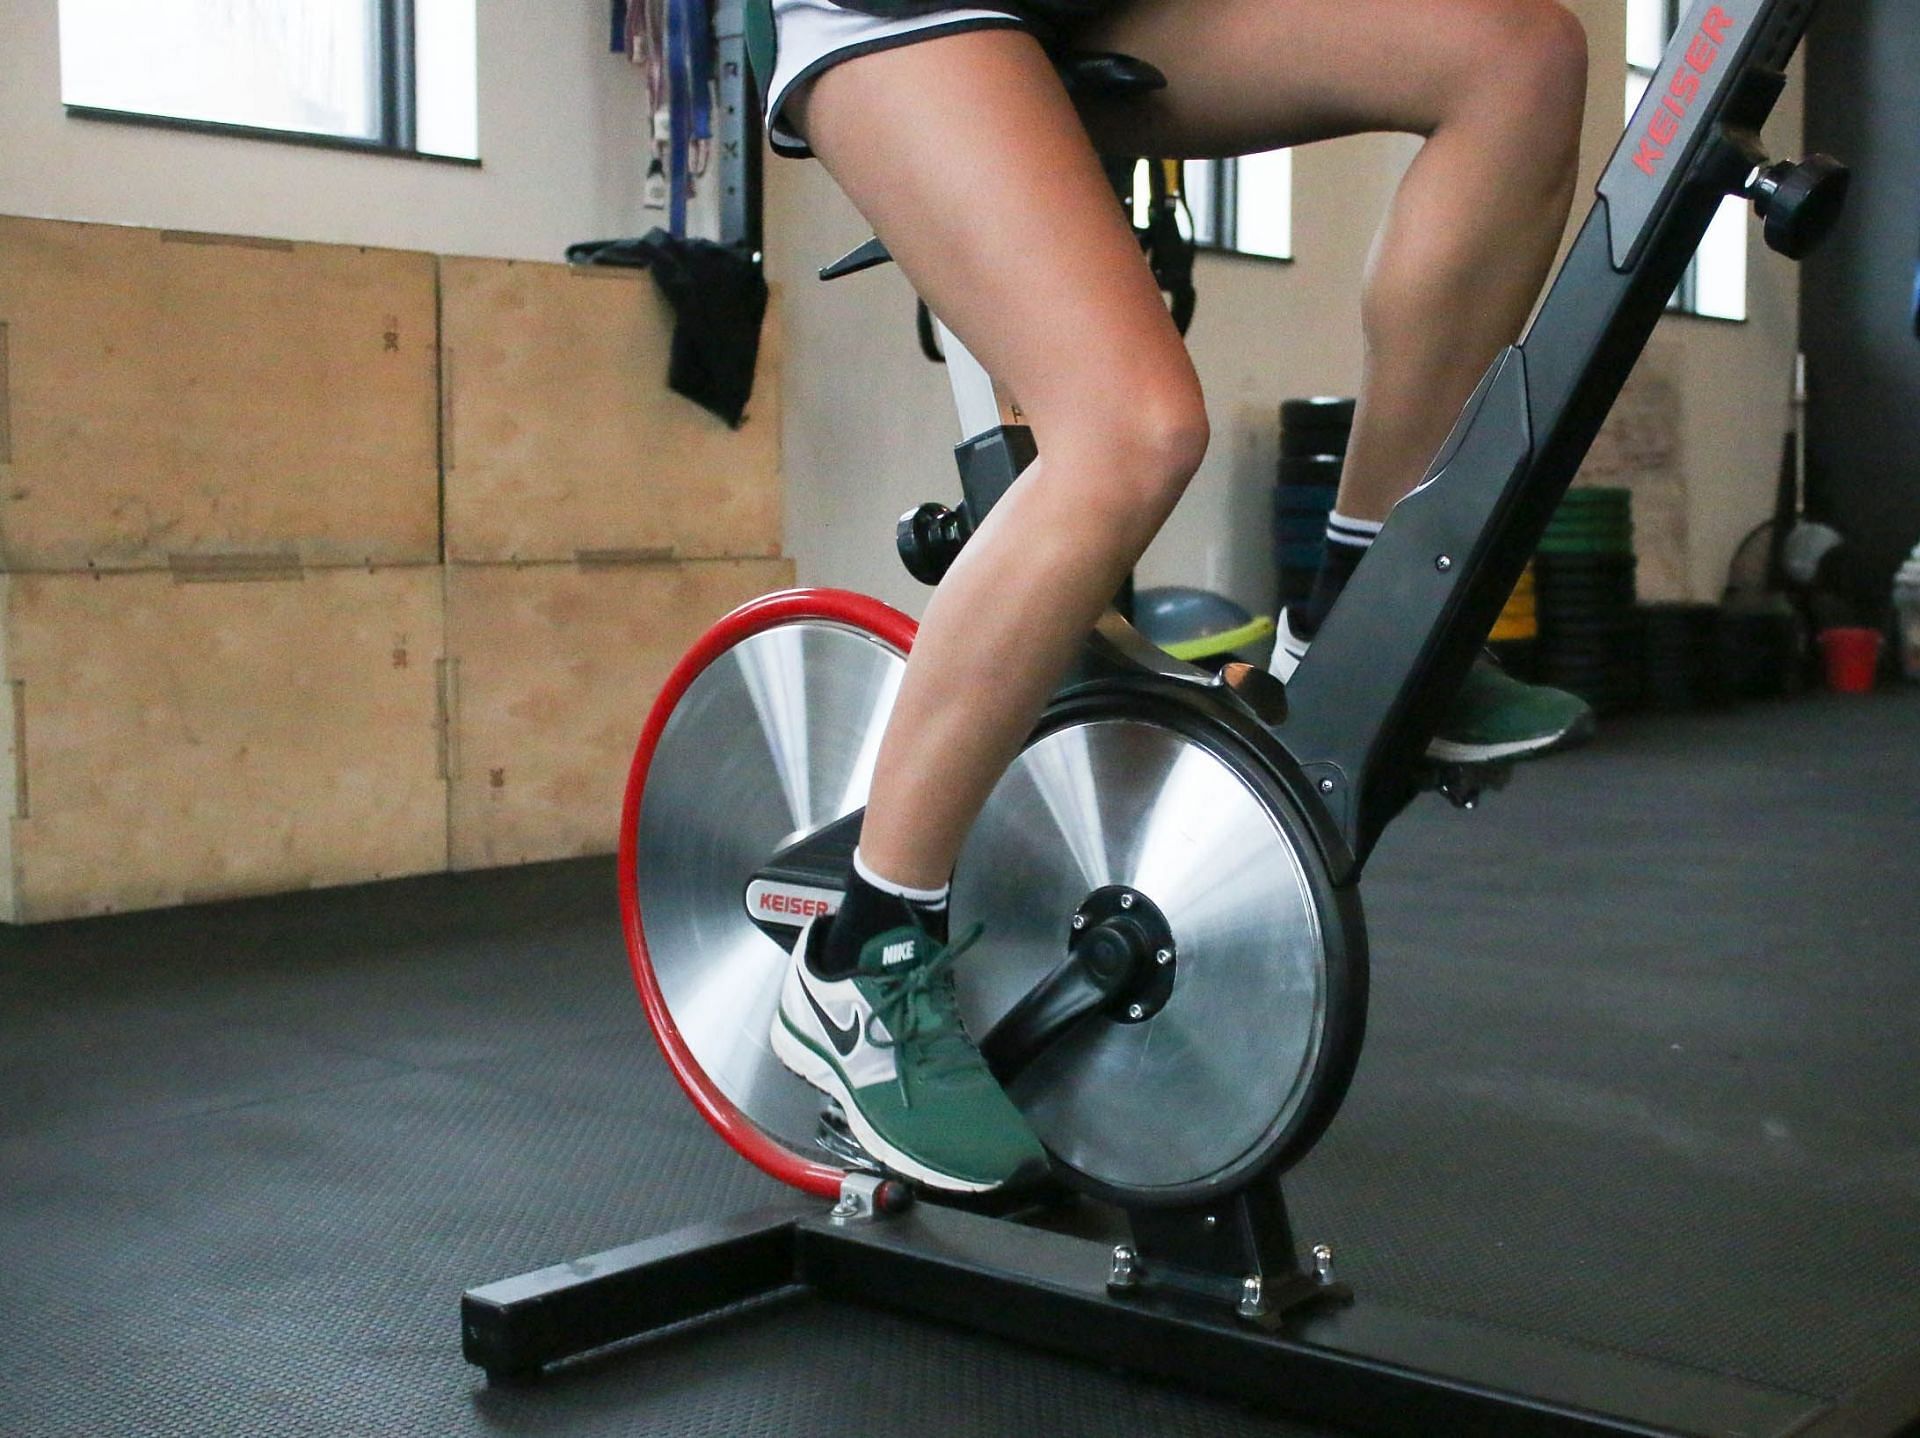 Spinning exercise strengthens lower body muscles. (Image via Pexels/ Element Digital)